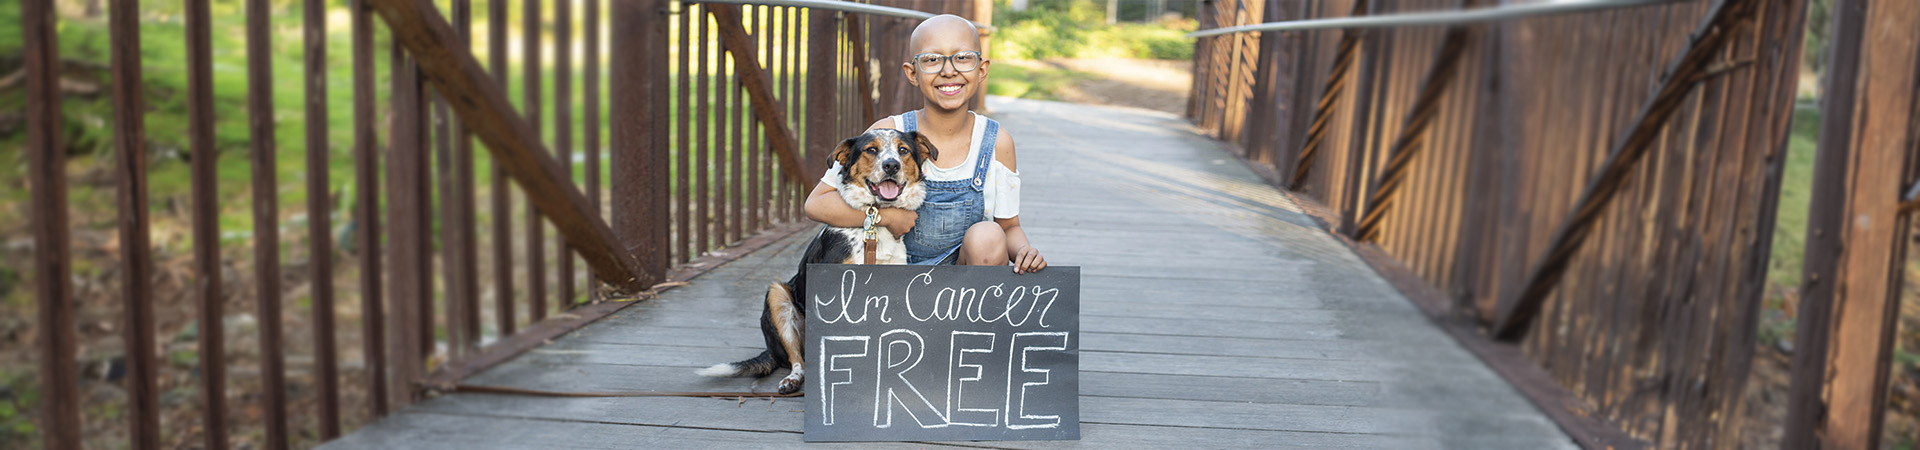  Sarah celebrates with her dog holding a sign saying "I'm cancer free". 